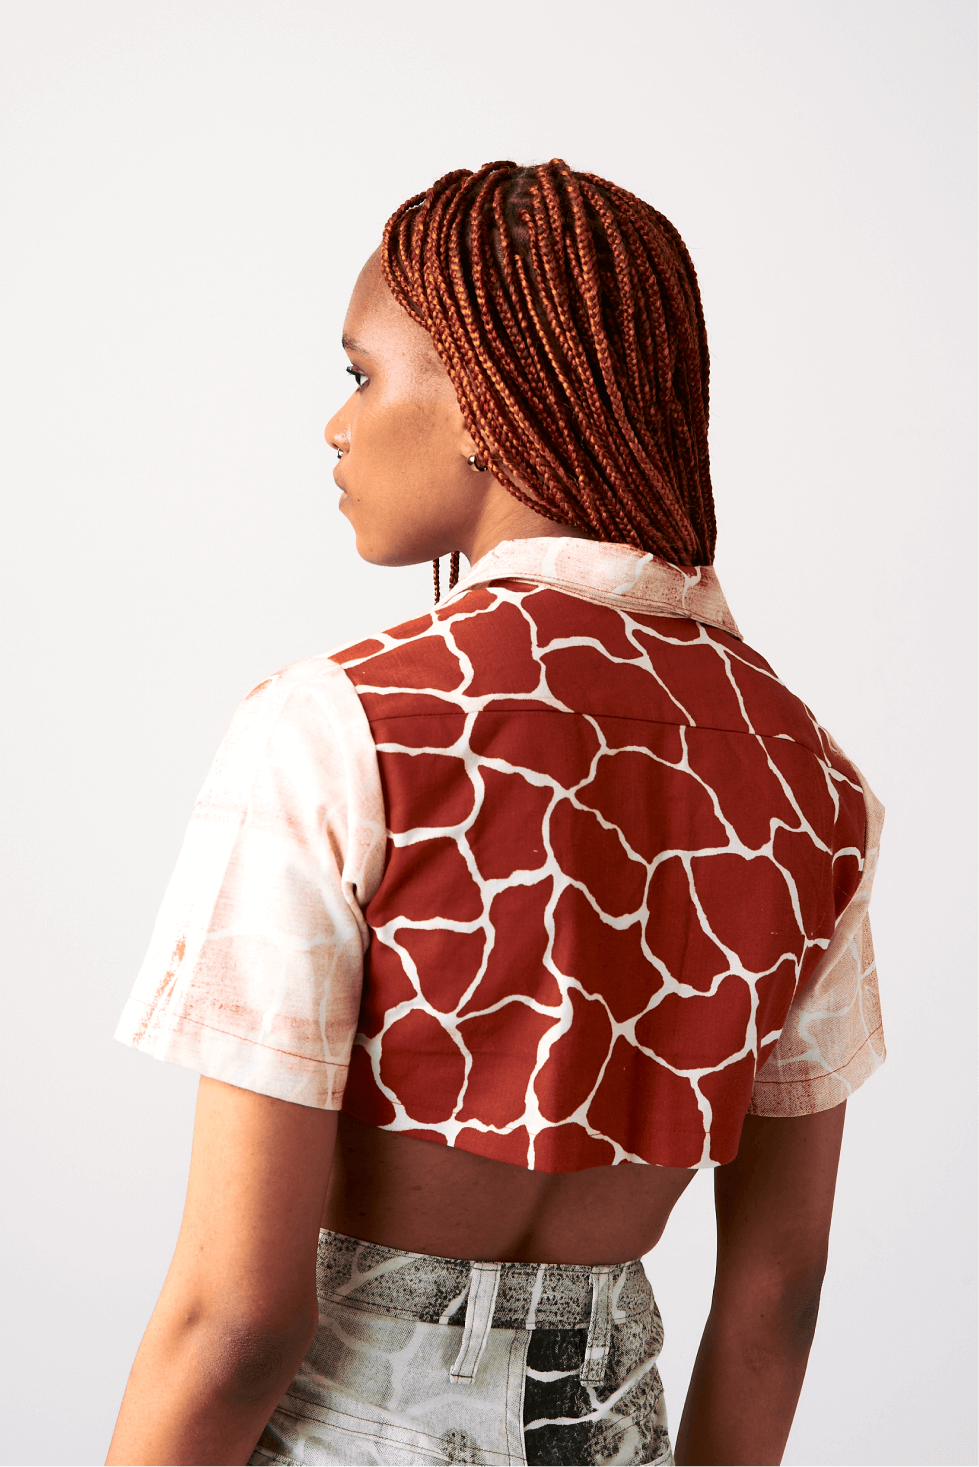 Shop Twiga Print Crop Top by Nairobi Apparel District on Arrai. Discover stylish, affordable clothing, jewelry, handbags and unique handmade pieces from top Kenyan & African fashion brands prioritising sustainability and quality craftsmanship.